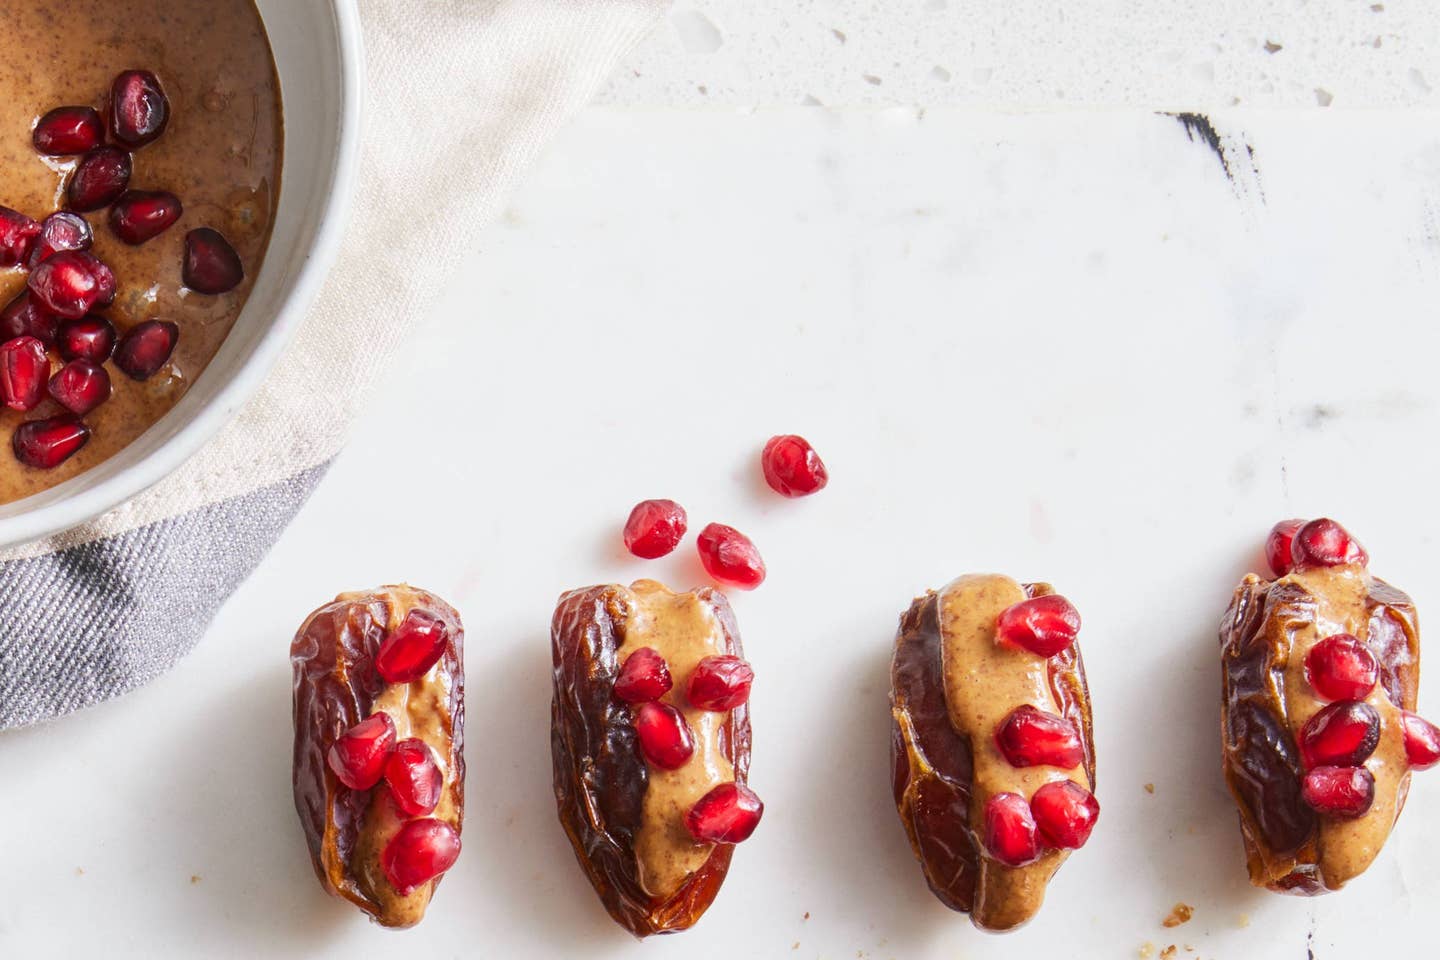 Medjool dates stuffed with nut butter and sprinkled with pomegranate arils